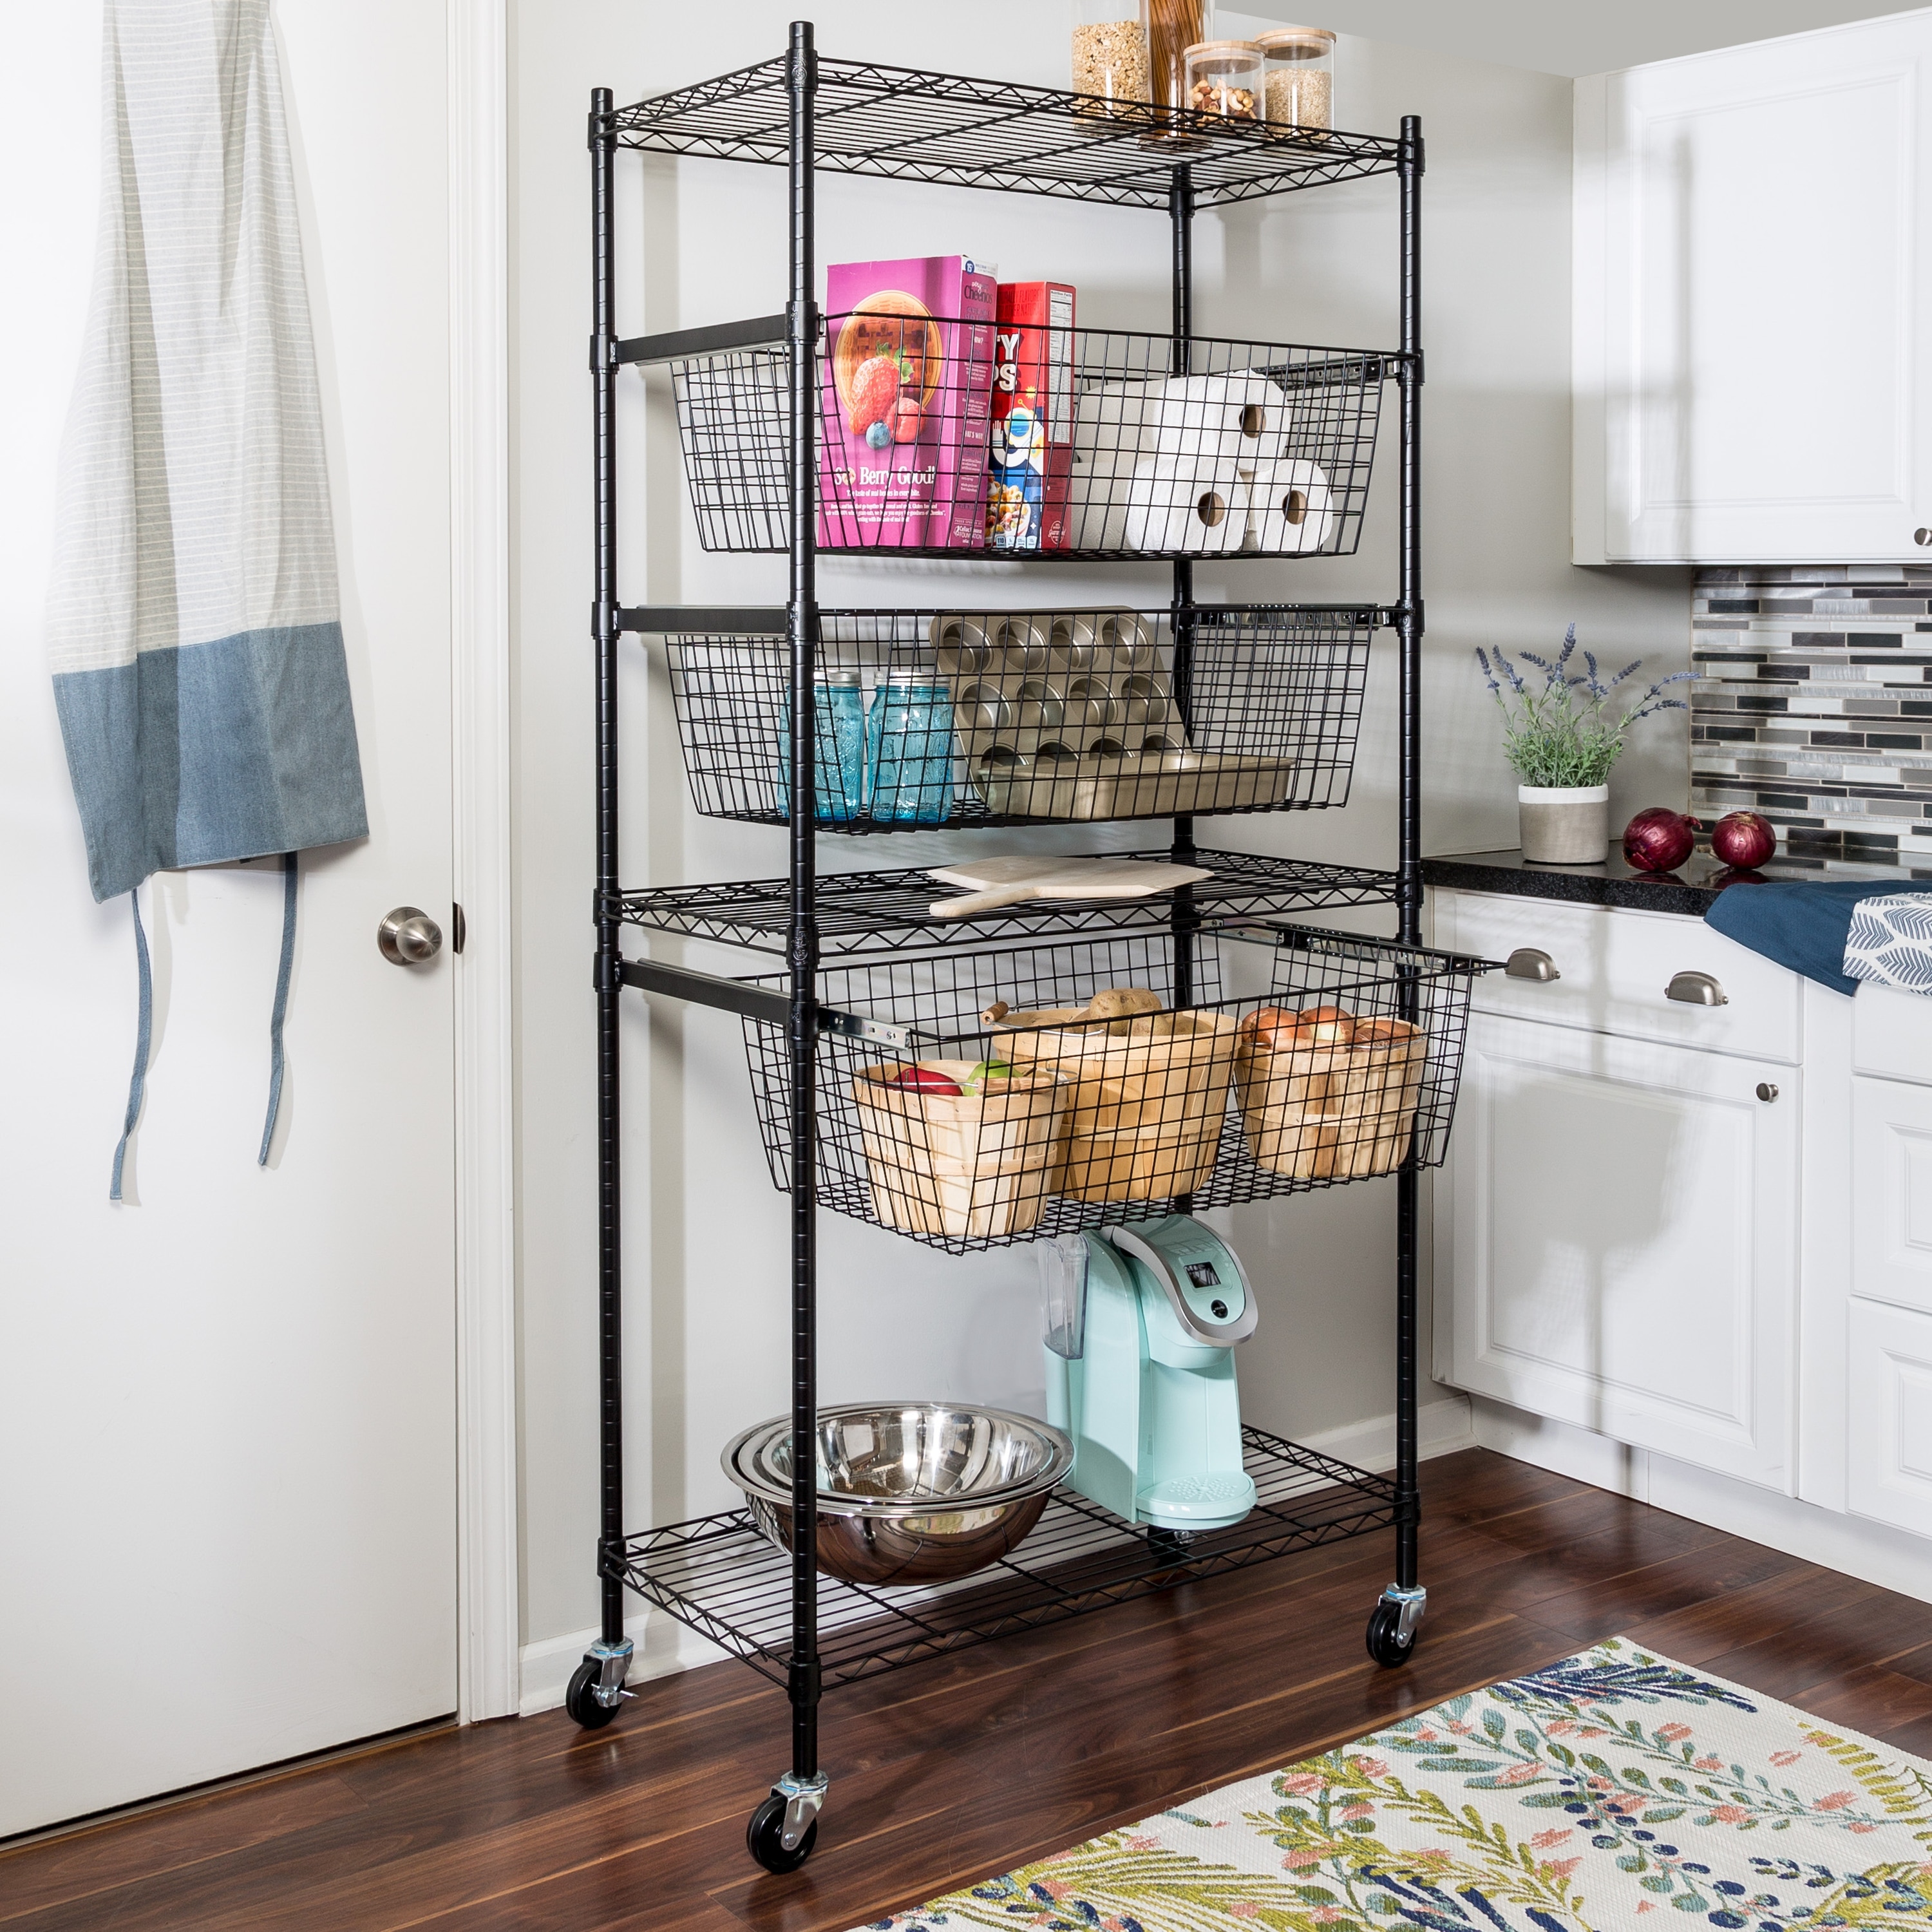 https://ak1.ostkcdn.com/images/products/is/images/direct/fd9677fd439890f05e7284da1c65073497562fbf/Black-3-Tier-Adjustable-Shelving-Unit-with-Storage-Drawers.jpg